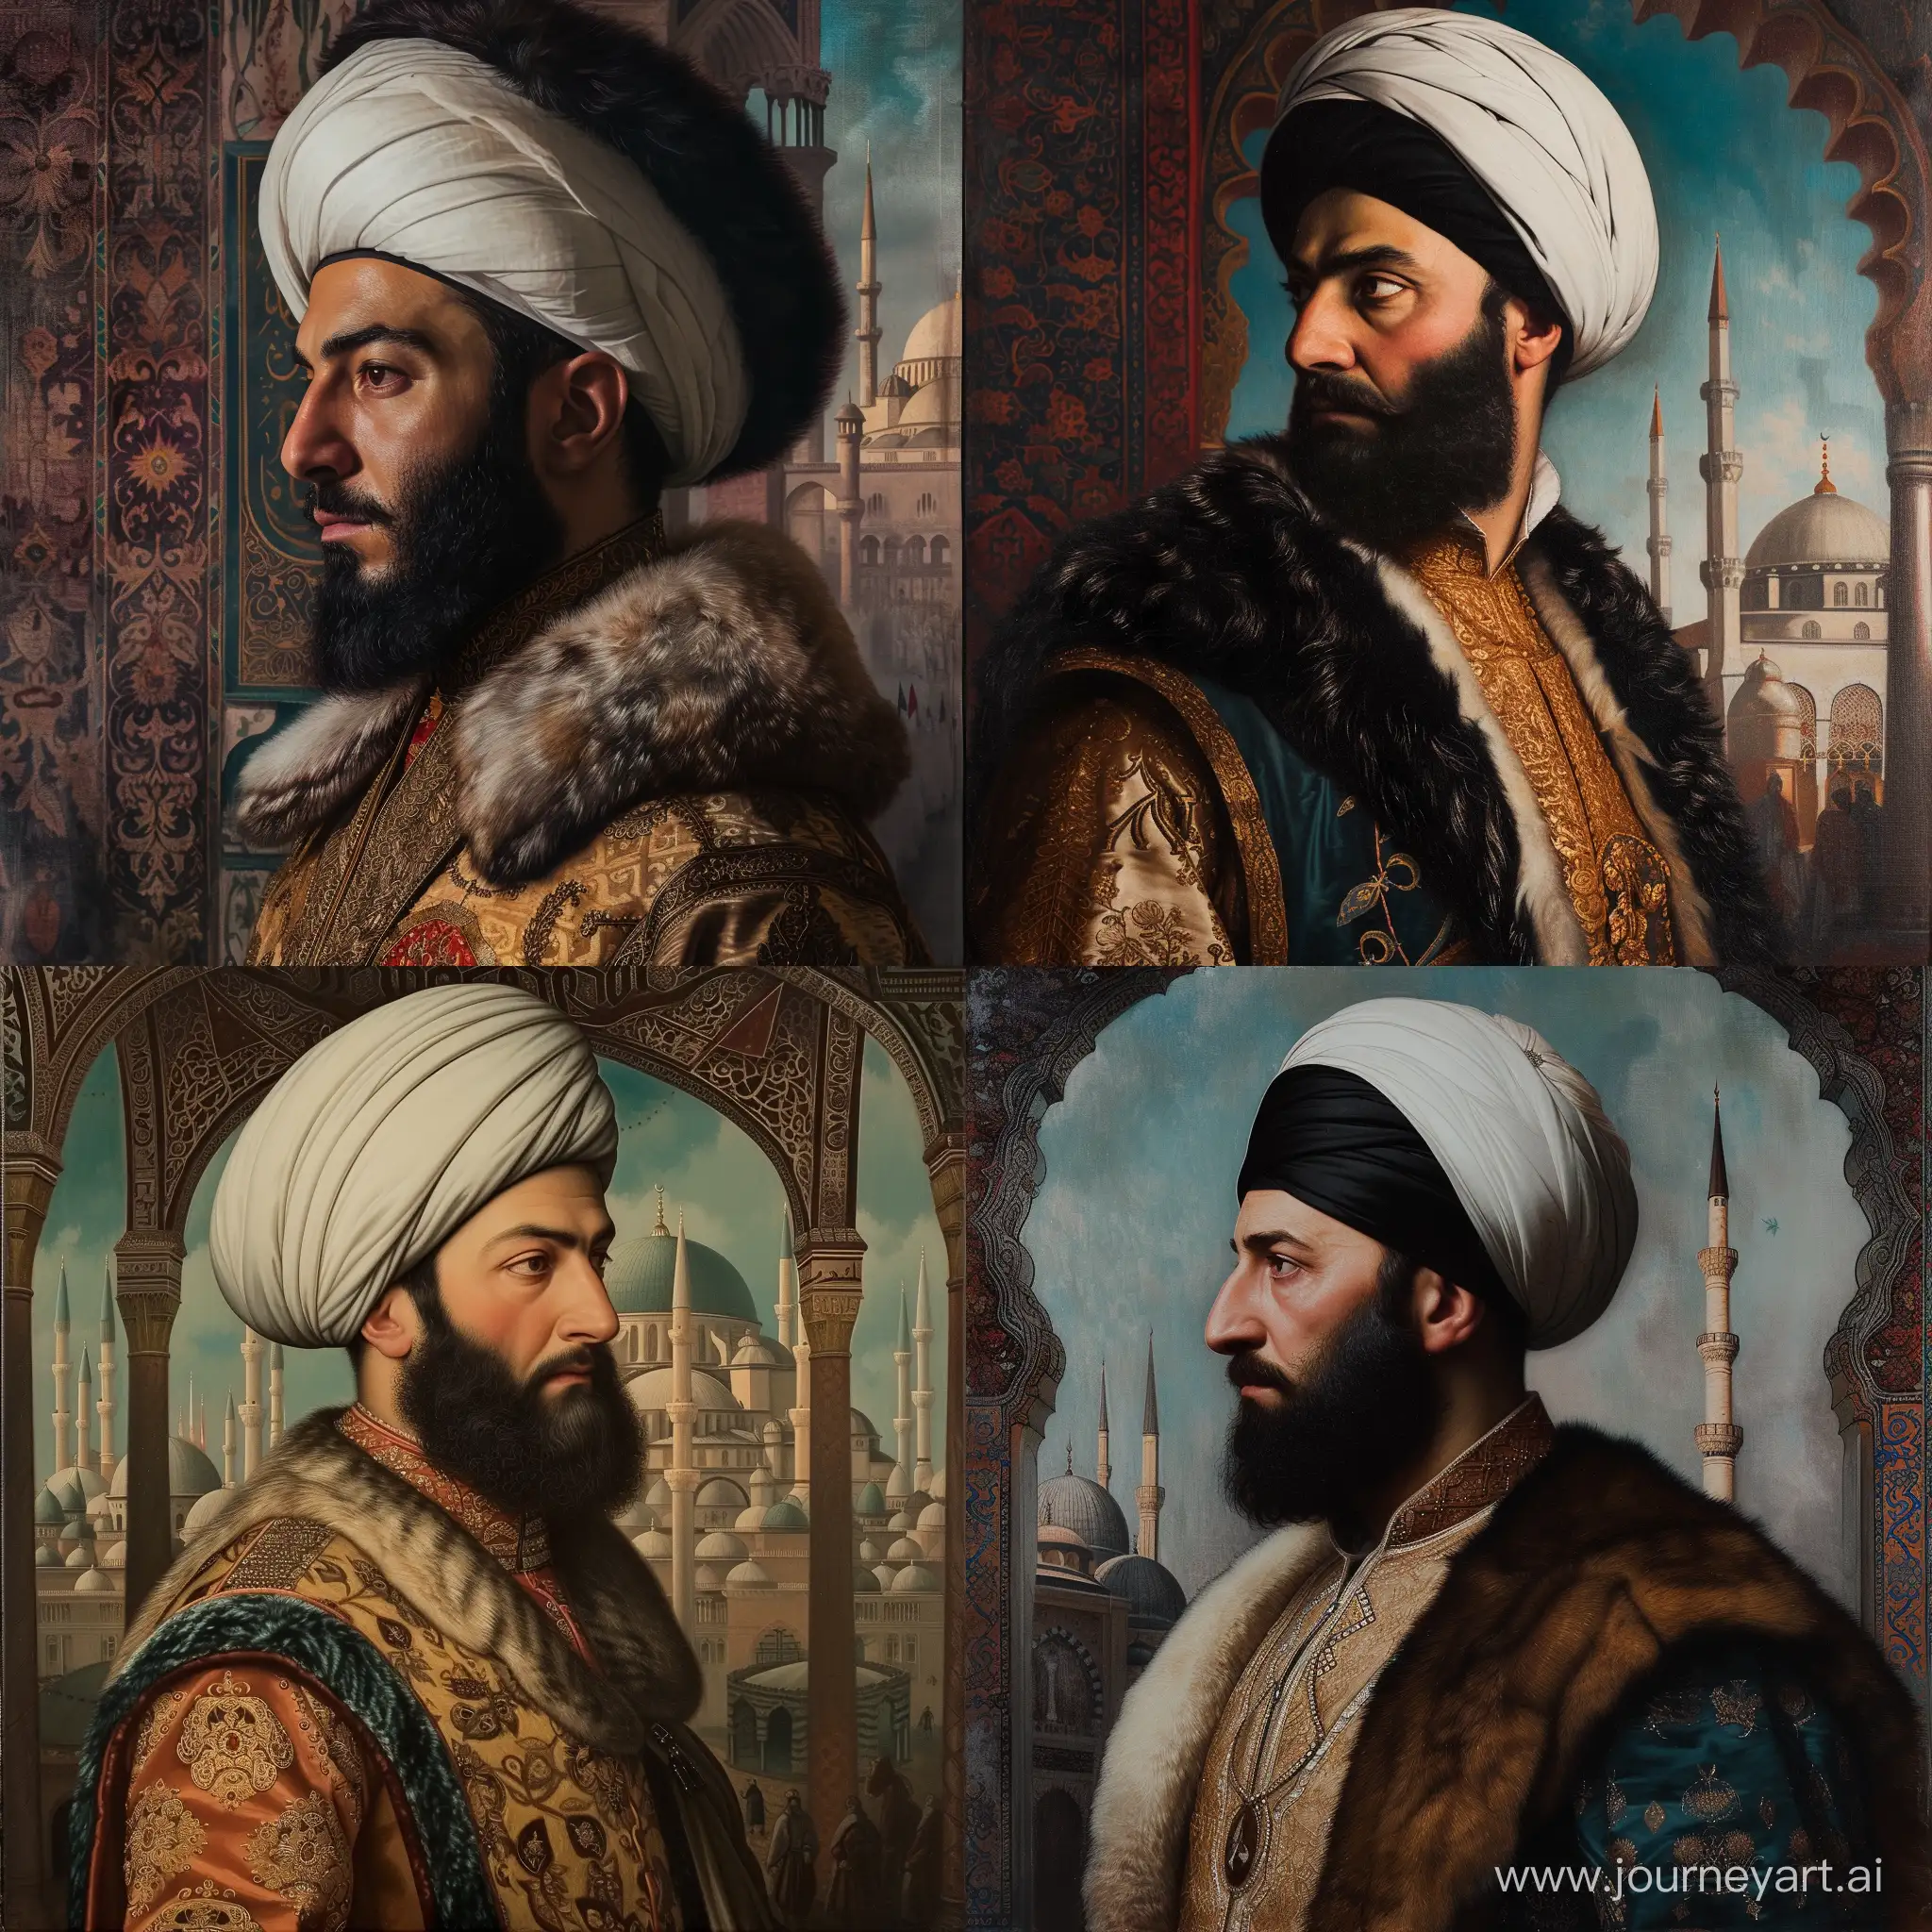 A portrait of 30 years old Ottoman Sultan Mehmed II, He has black average beard, curved Ottoman nose and small lips. Wearing luxury Ottoman caftan with fur collars and medium size white Ottoman turban. Side pose. Dramatic colors. Mosque themed background.